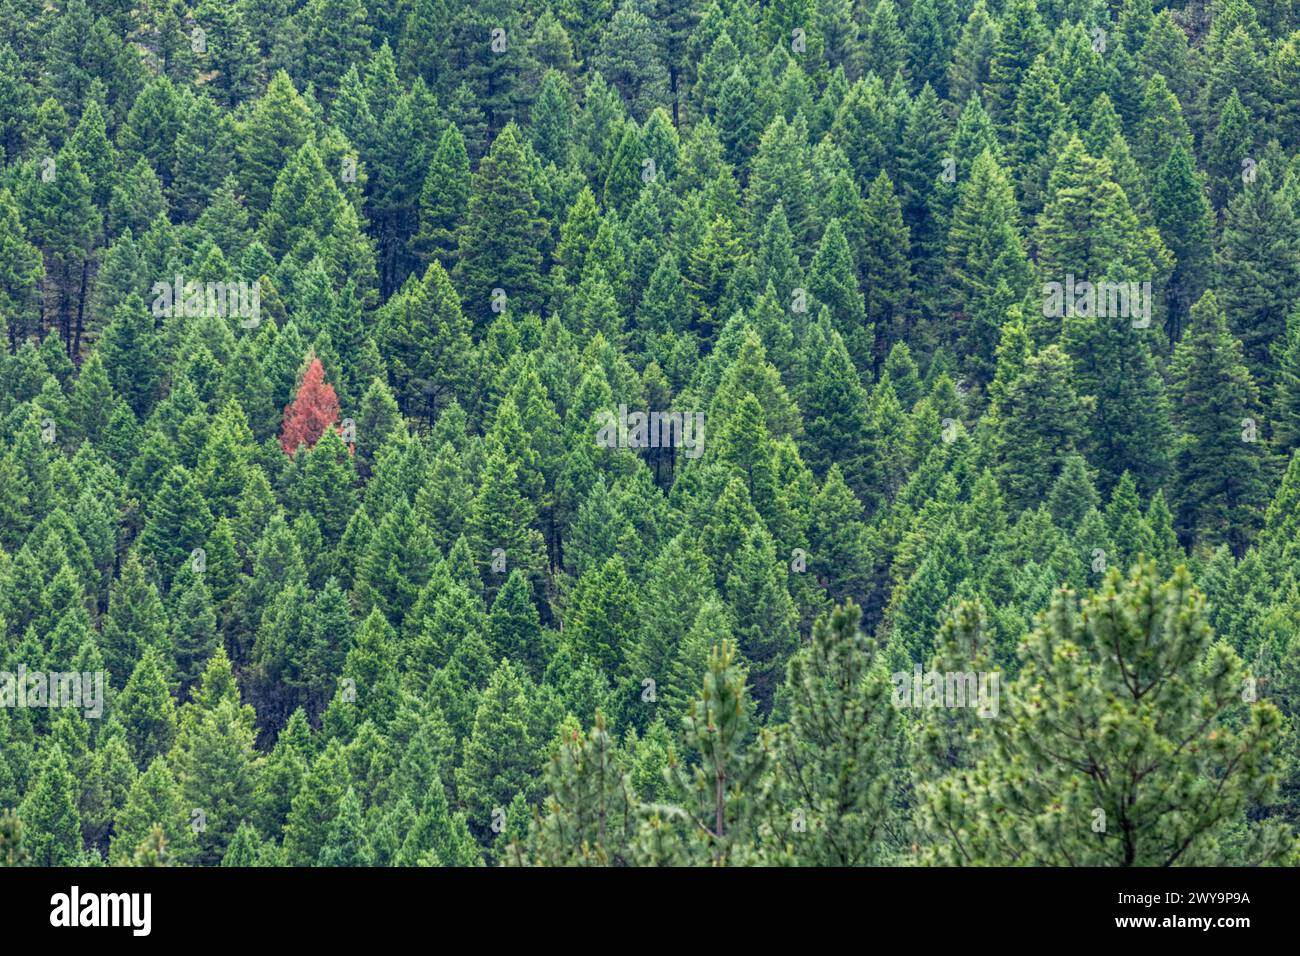 One red tree in the forest due to pine beetle damage Stock Photo